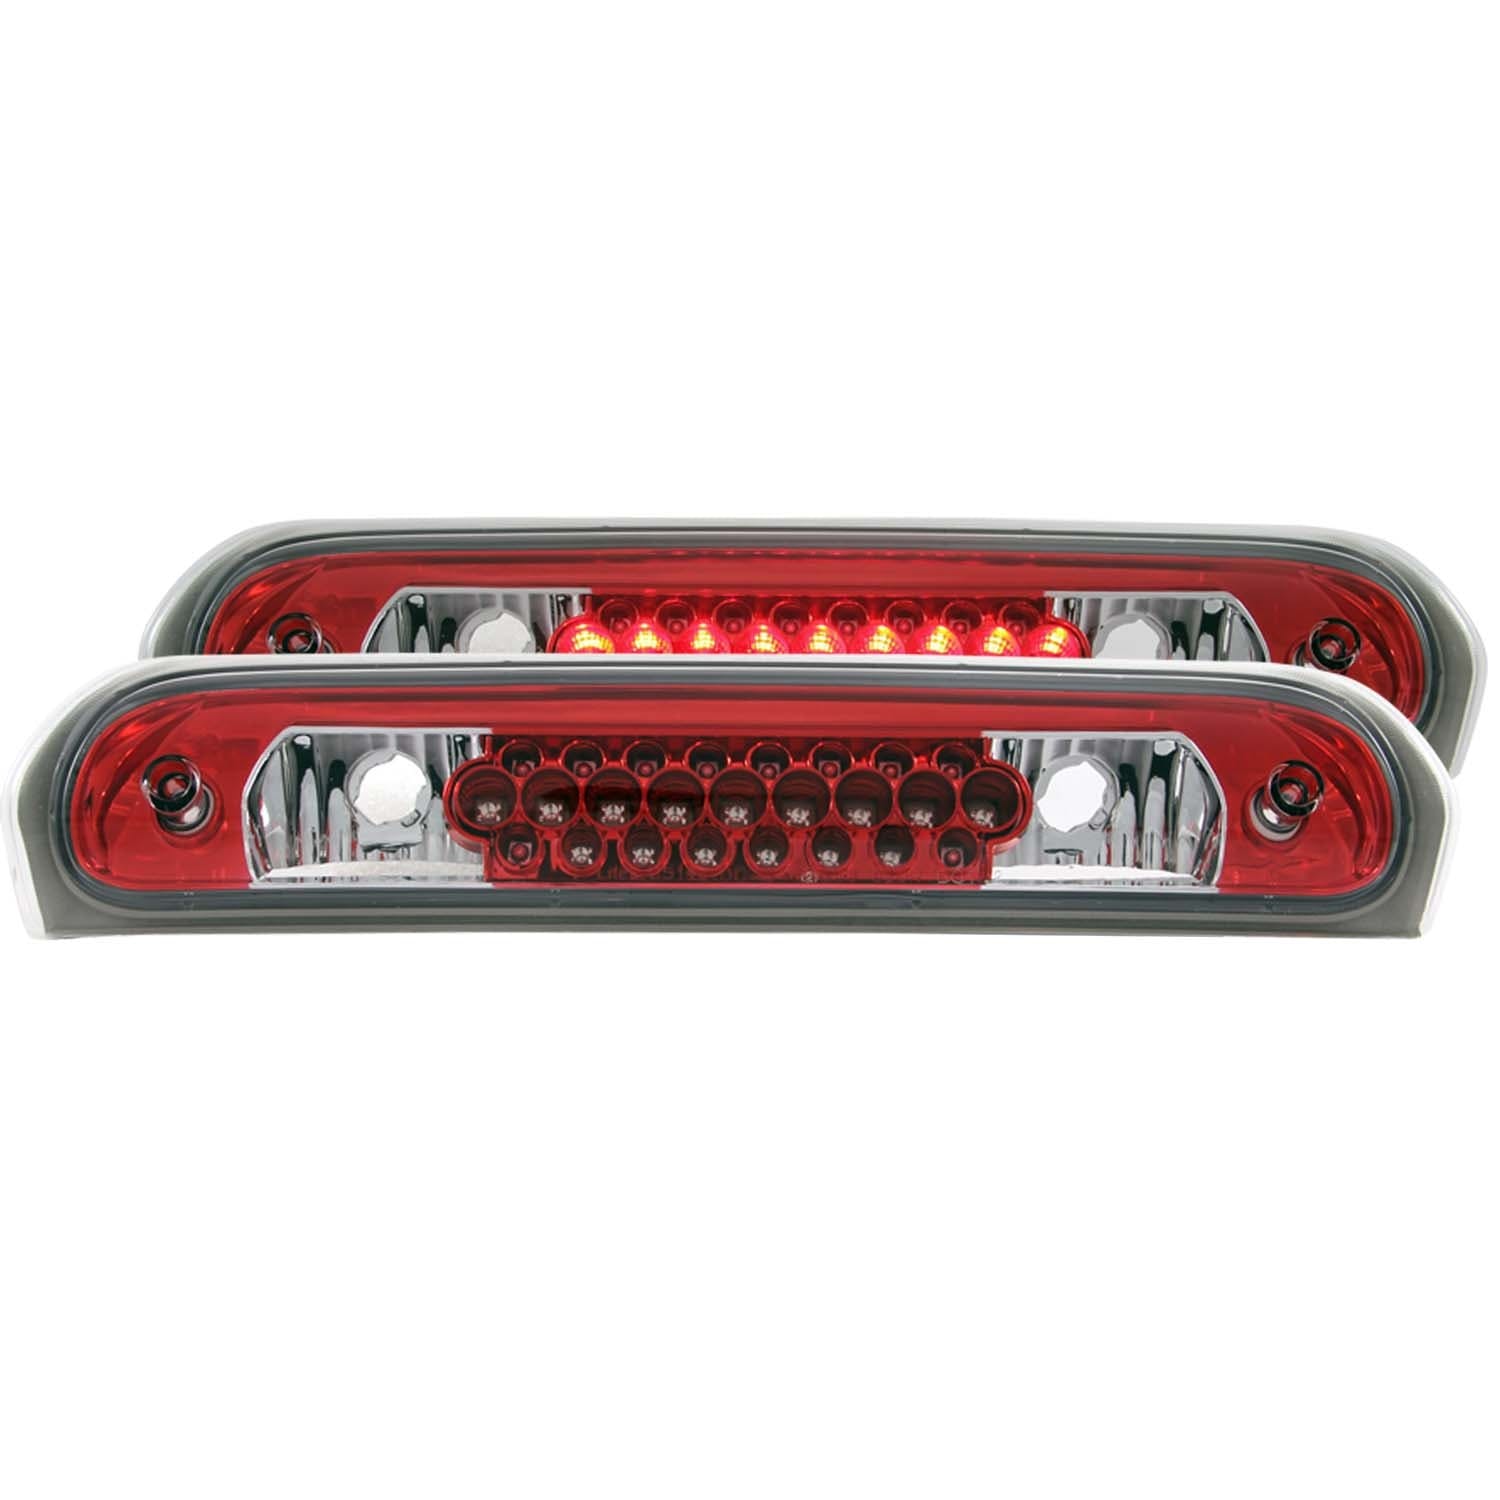 AnzoUSA 531007 LED 3rd Brake Light Red/Clear